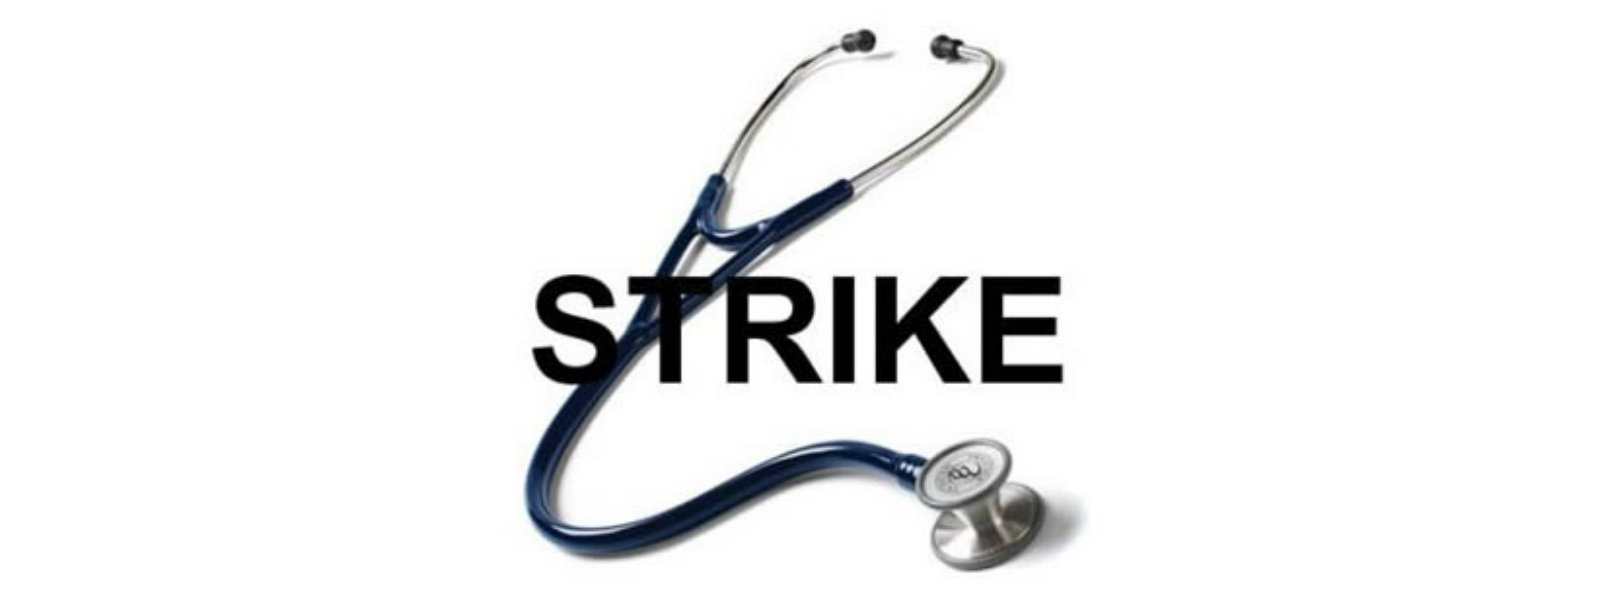 Healthcare professionals launch strike